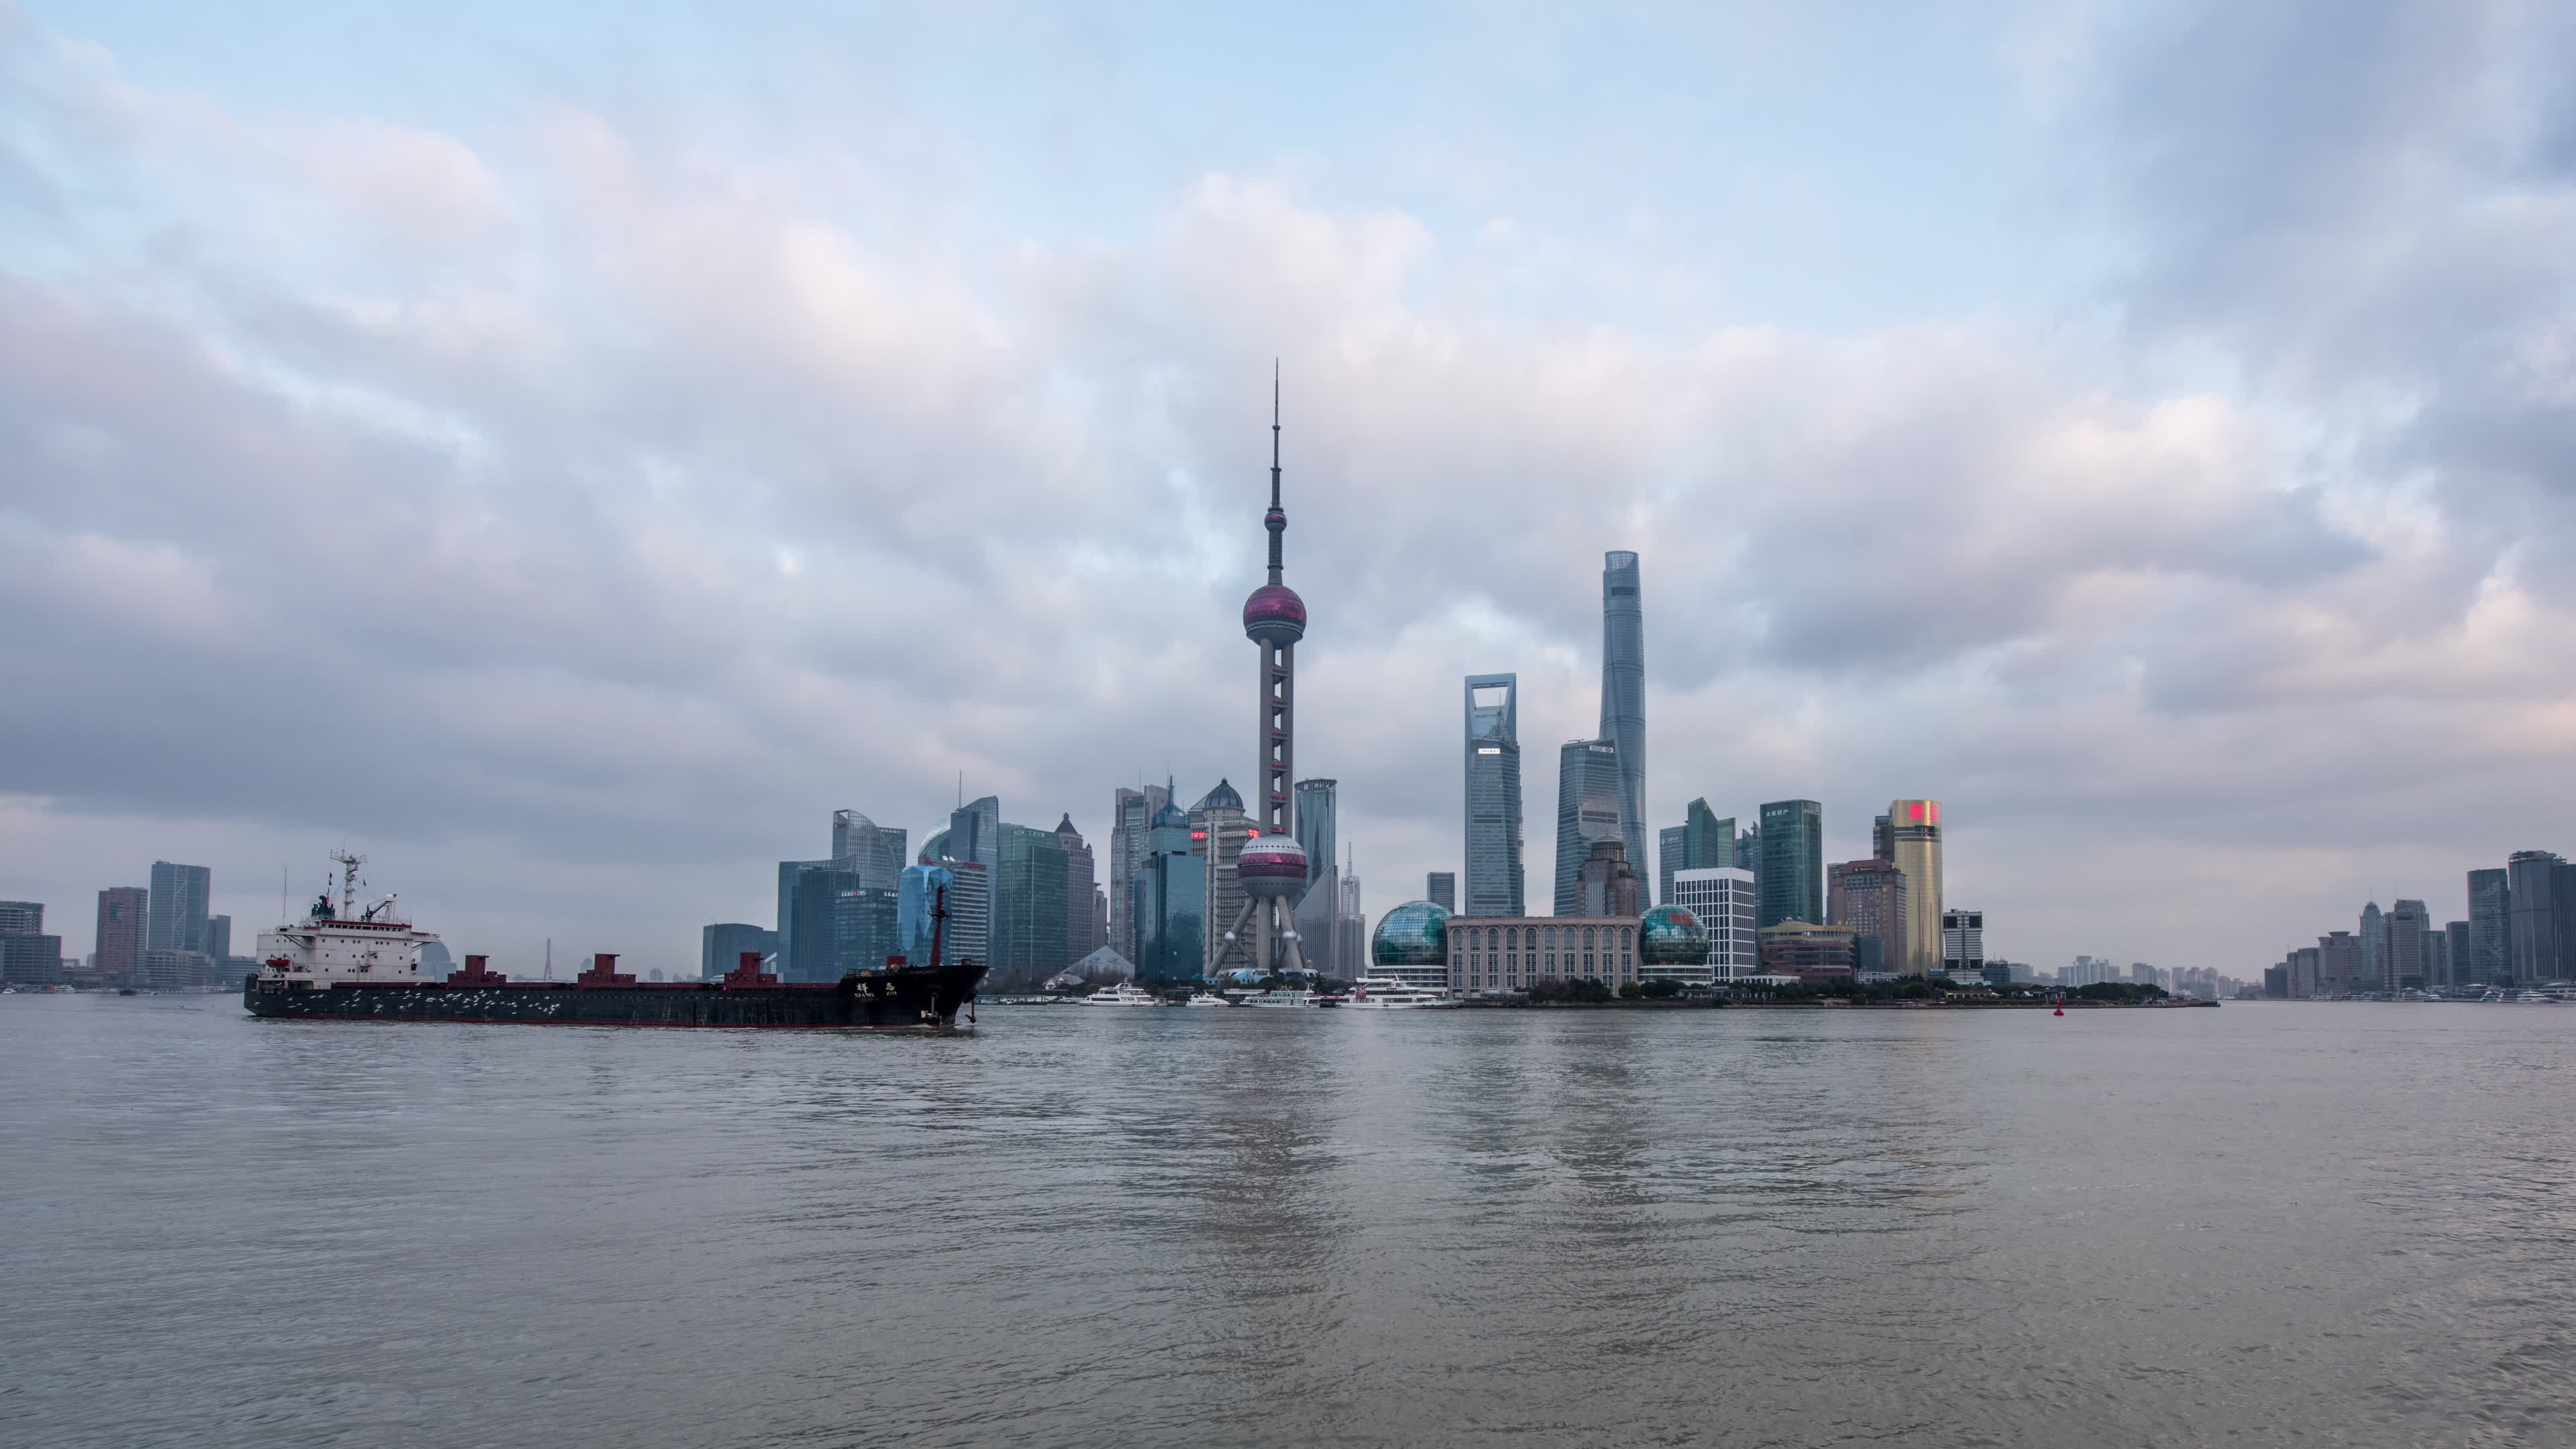 Cityscape: Oriental Pearl Tower, Huangpu River, The Pudong New Area, Shanghai, China. 3840x2160 4K Wallpaper.